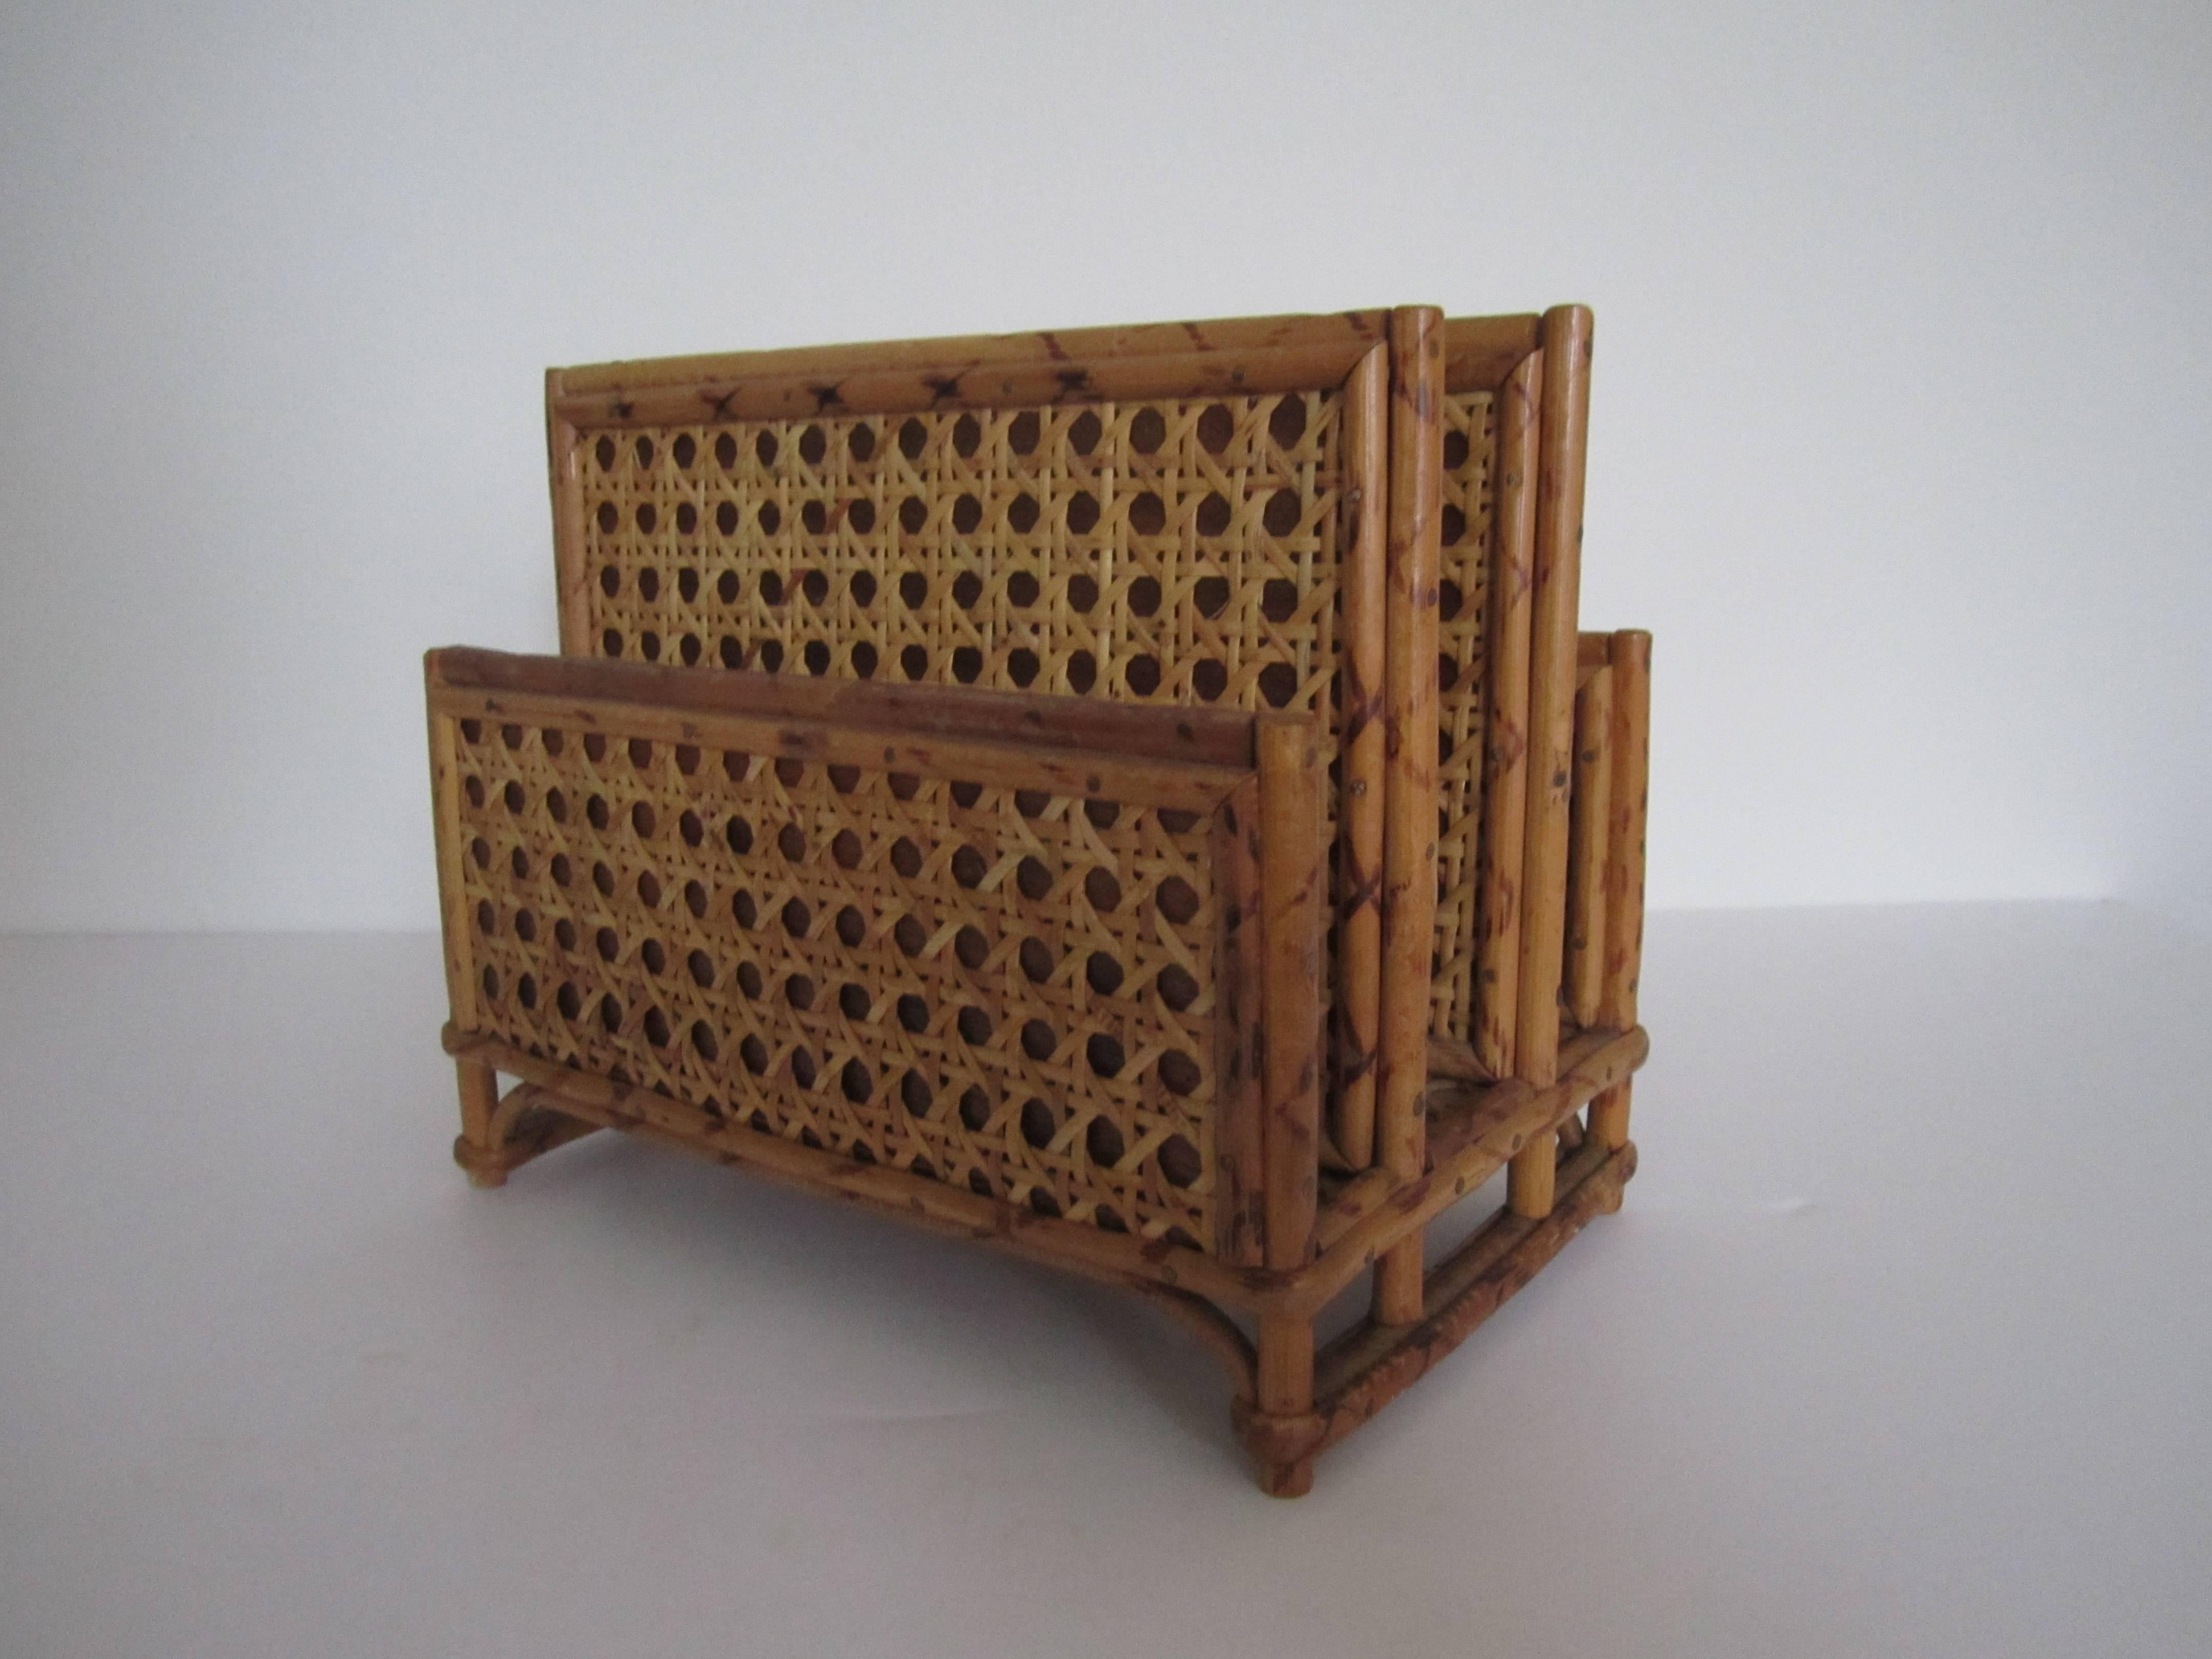 A chic vintage bamboo and rattan letter or mail holder with four compartments, circa 1970s. Measurements include: 7"h x 8.5"w x 5.5"d.  Item available here online. By request, item can be made available by appointment to the Trade (in